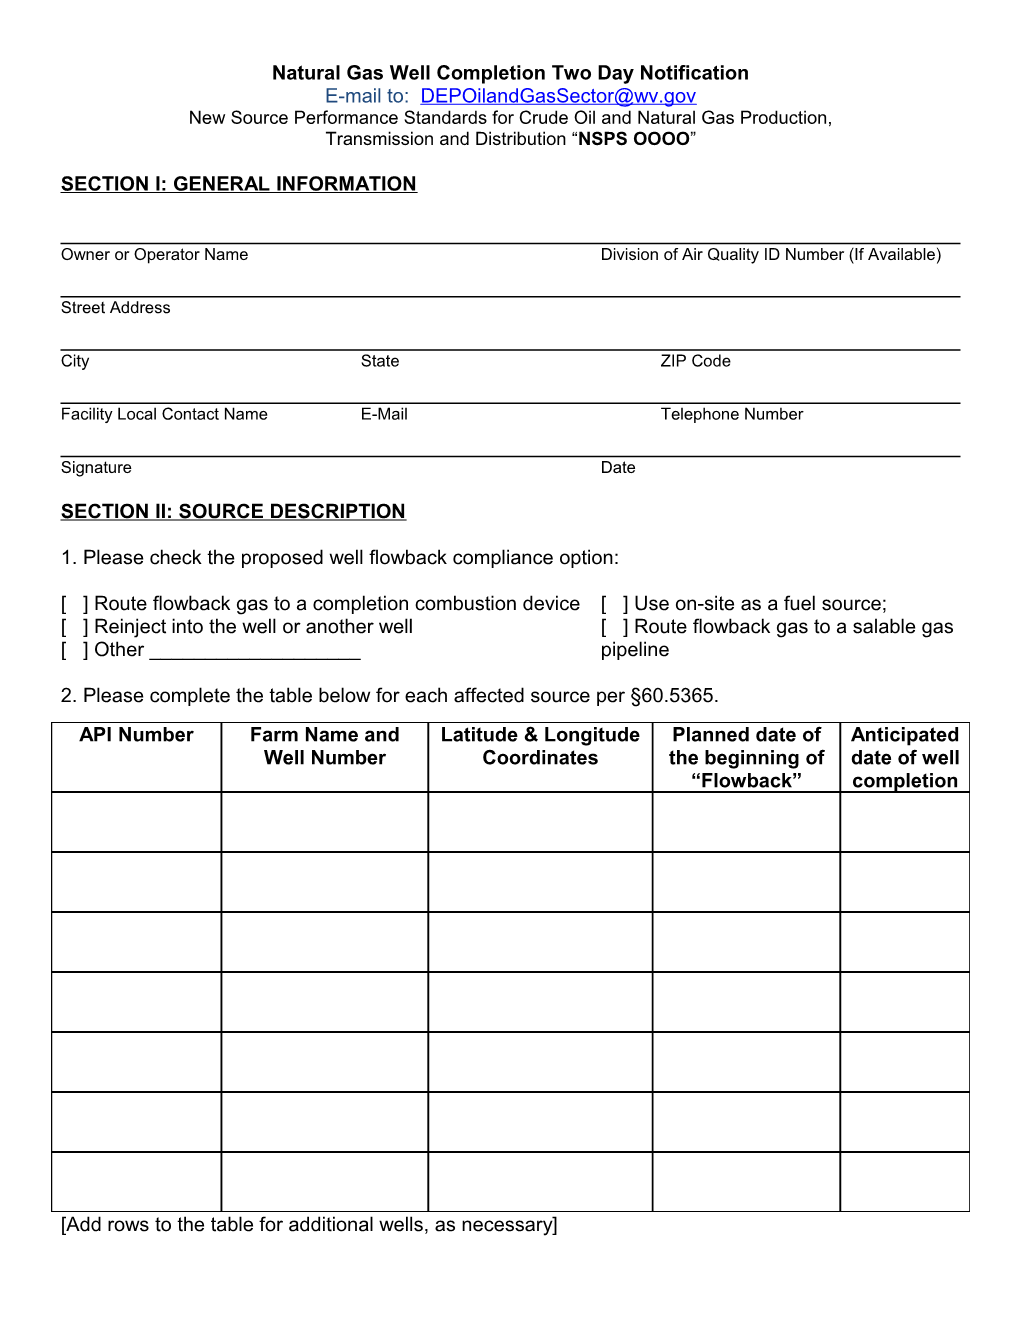 Initial Notification Form s3